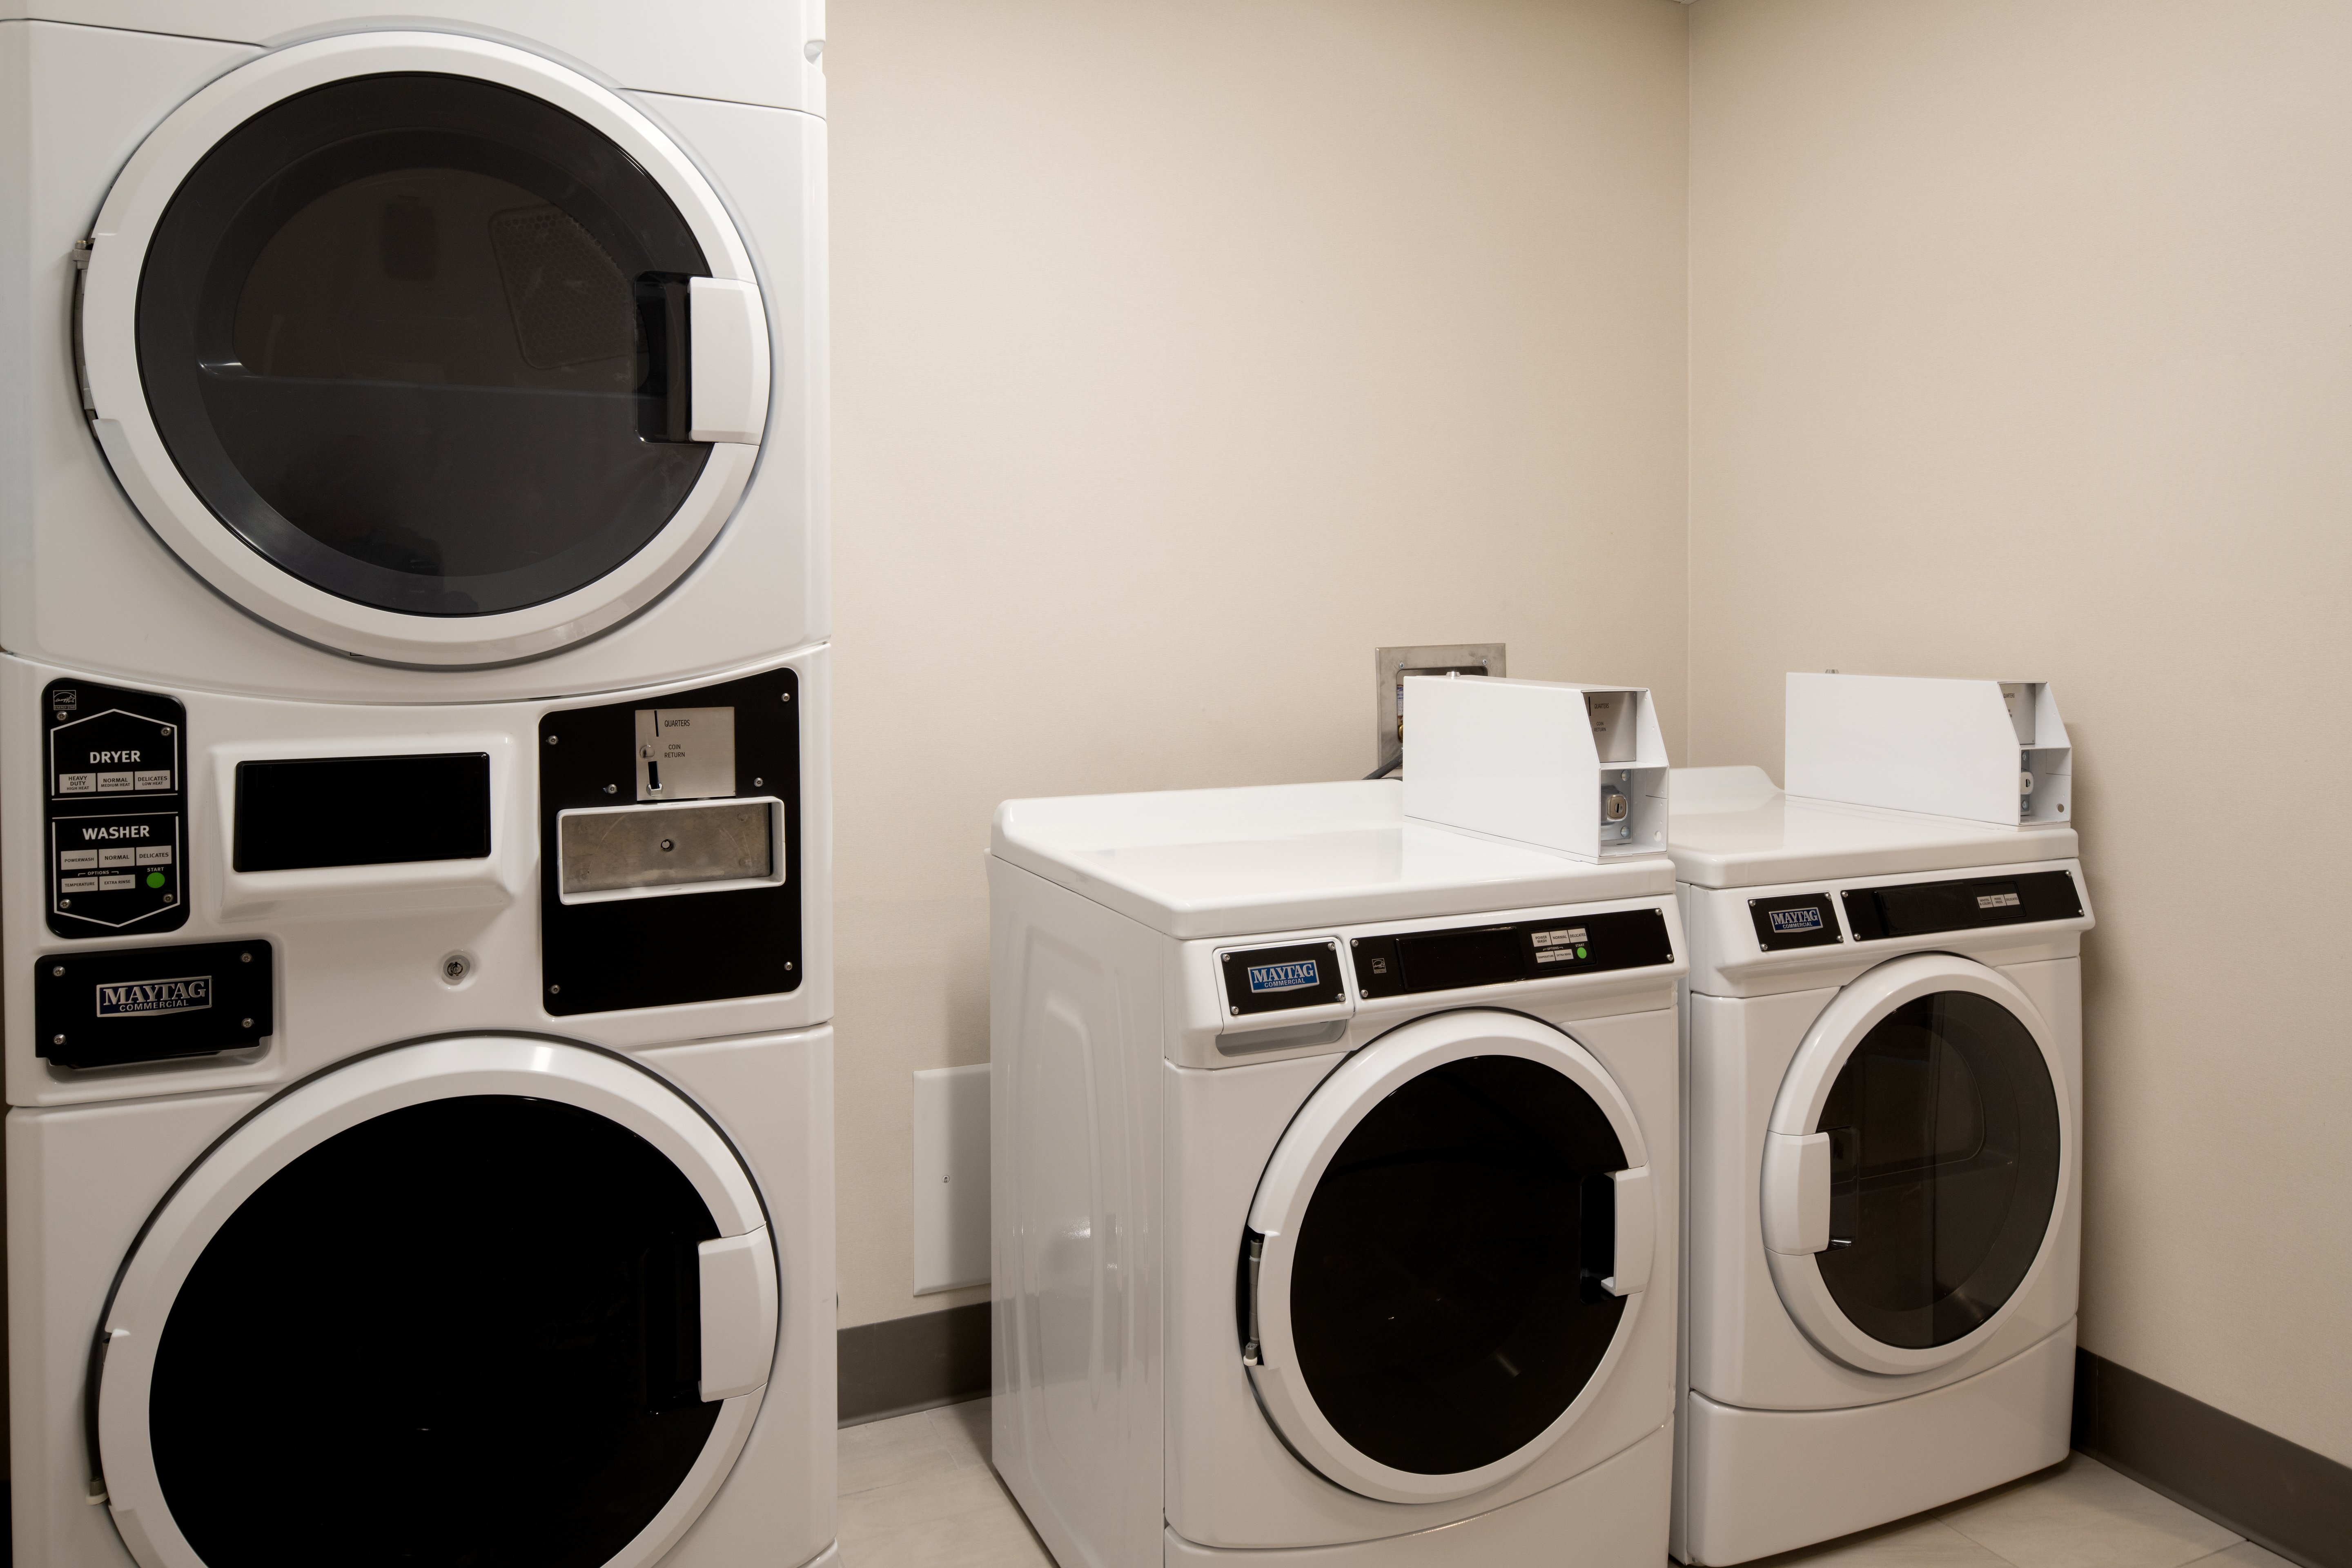 Onsite coin-operated laundry facility